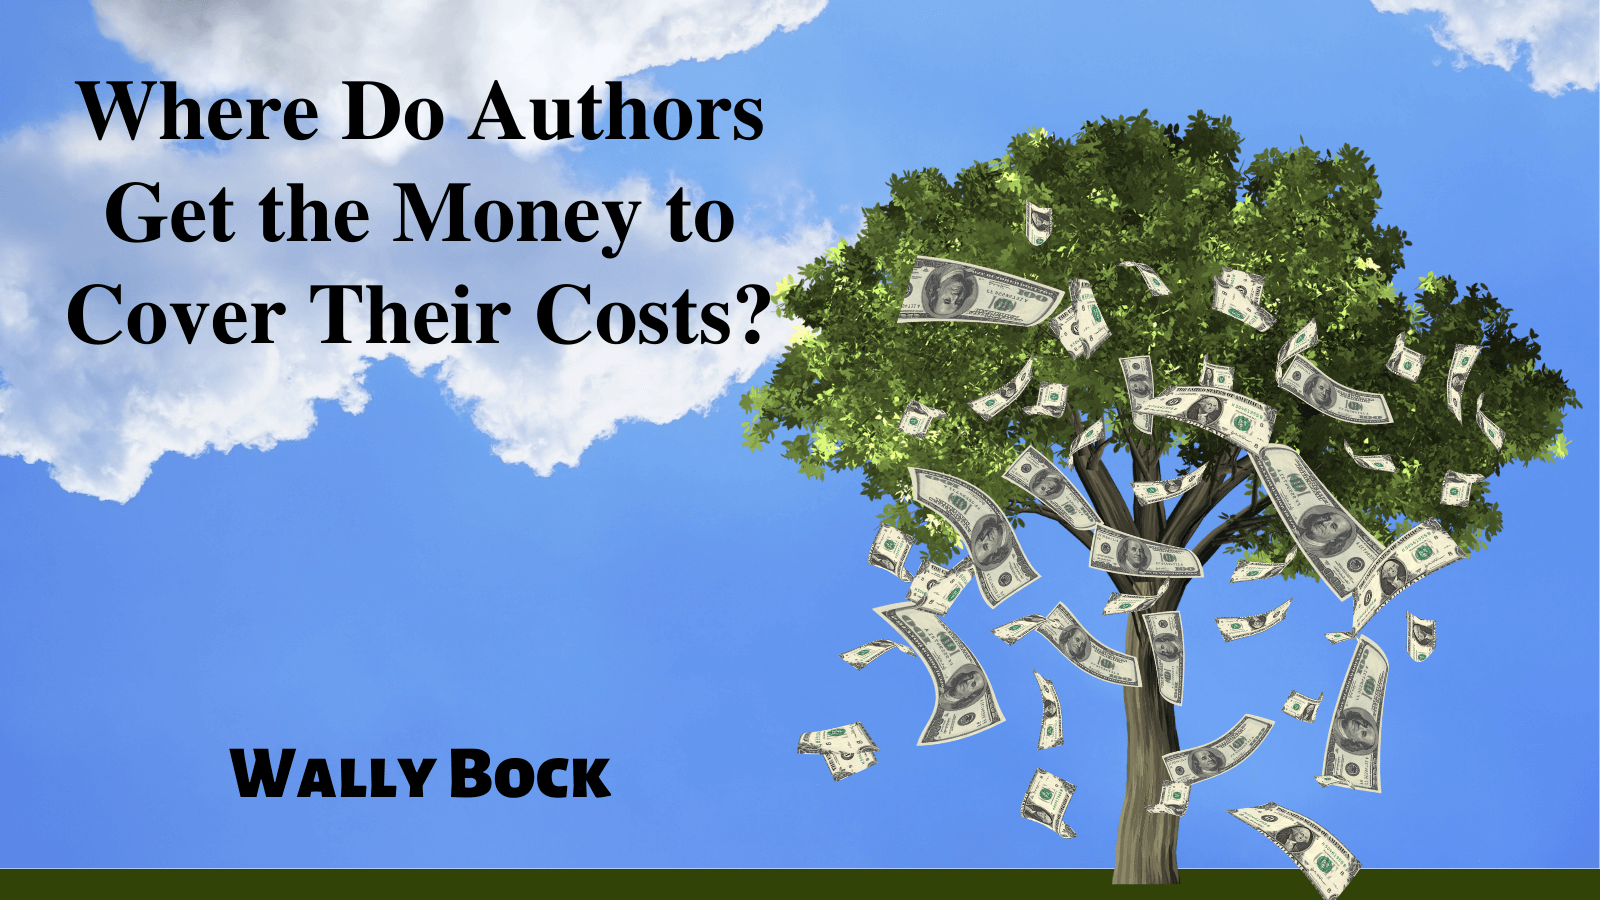 Profit: Where do authors get the money to cover their costs?